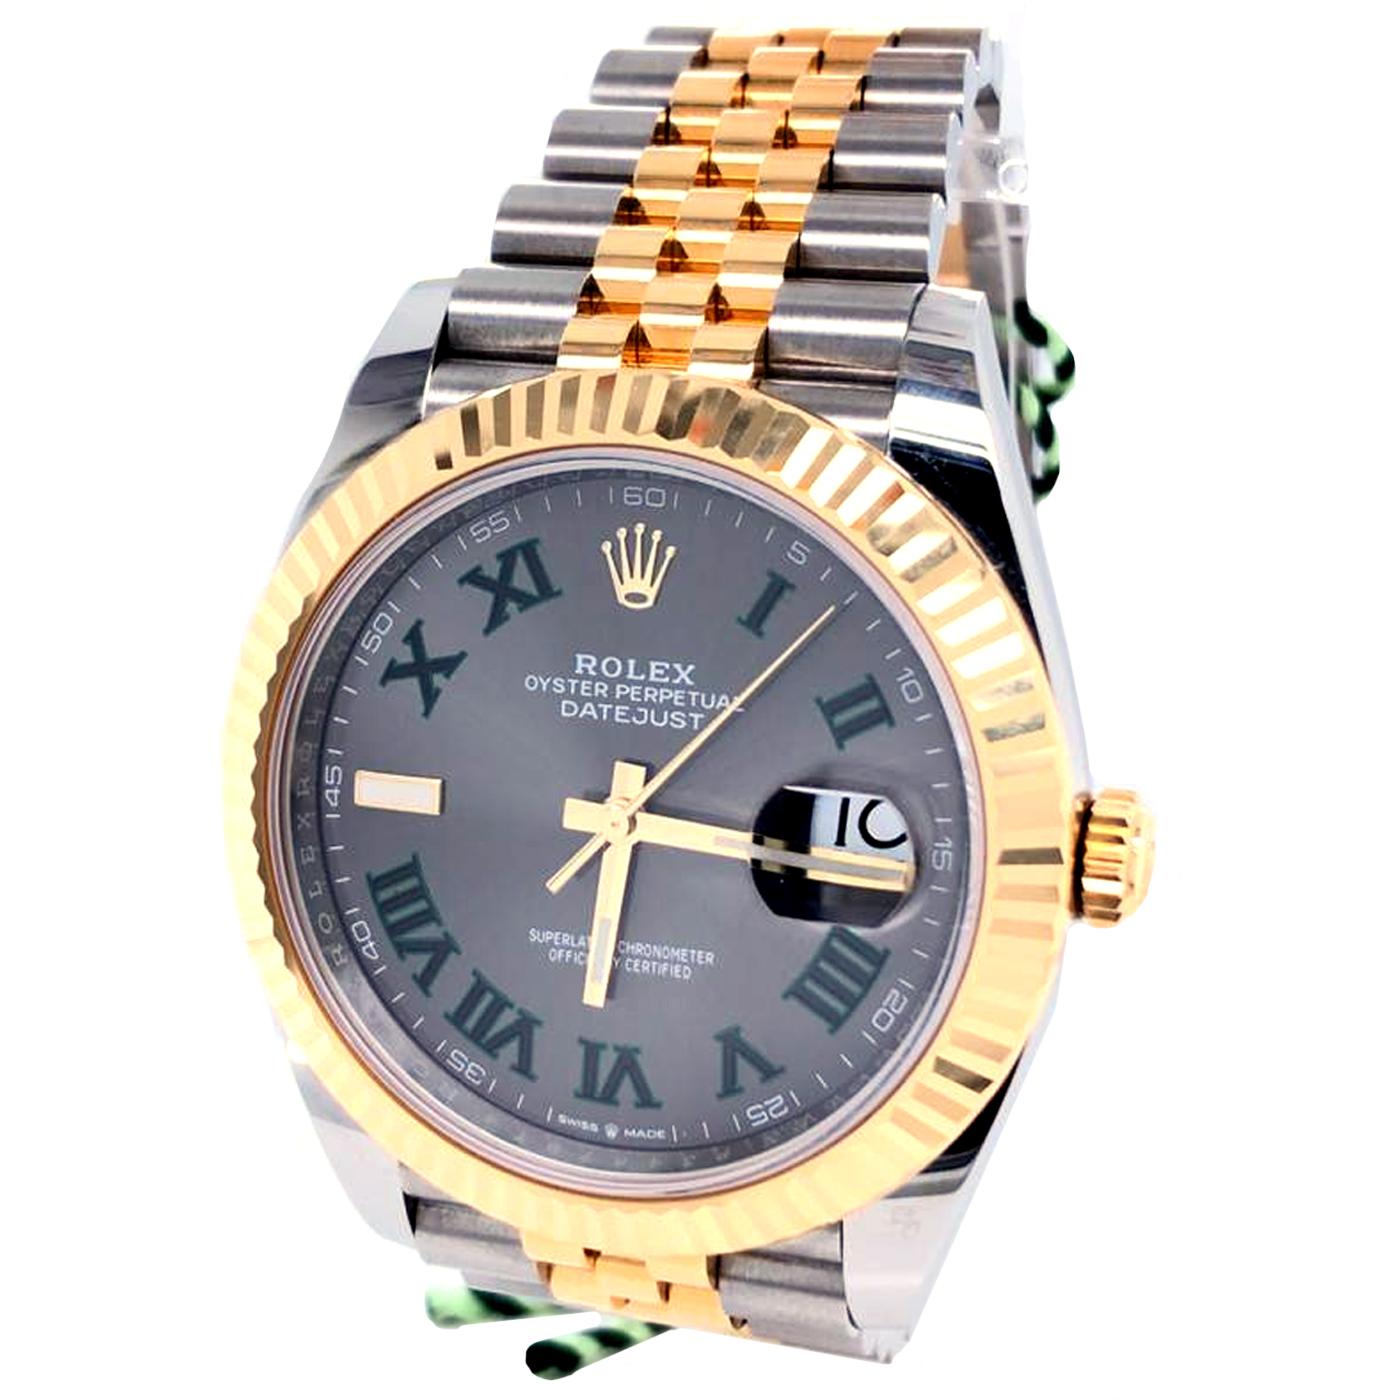 This Oyster Perpetual Datejust 41 in Oystersteel and yellow gold features a champagne-color dial and a Jubilee bracelet. The light reflections on the case sides and lugs highlight the elegant profile of the 41 mm Oyster case, which is fitted with a